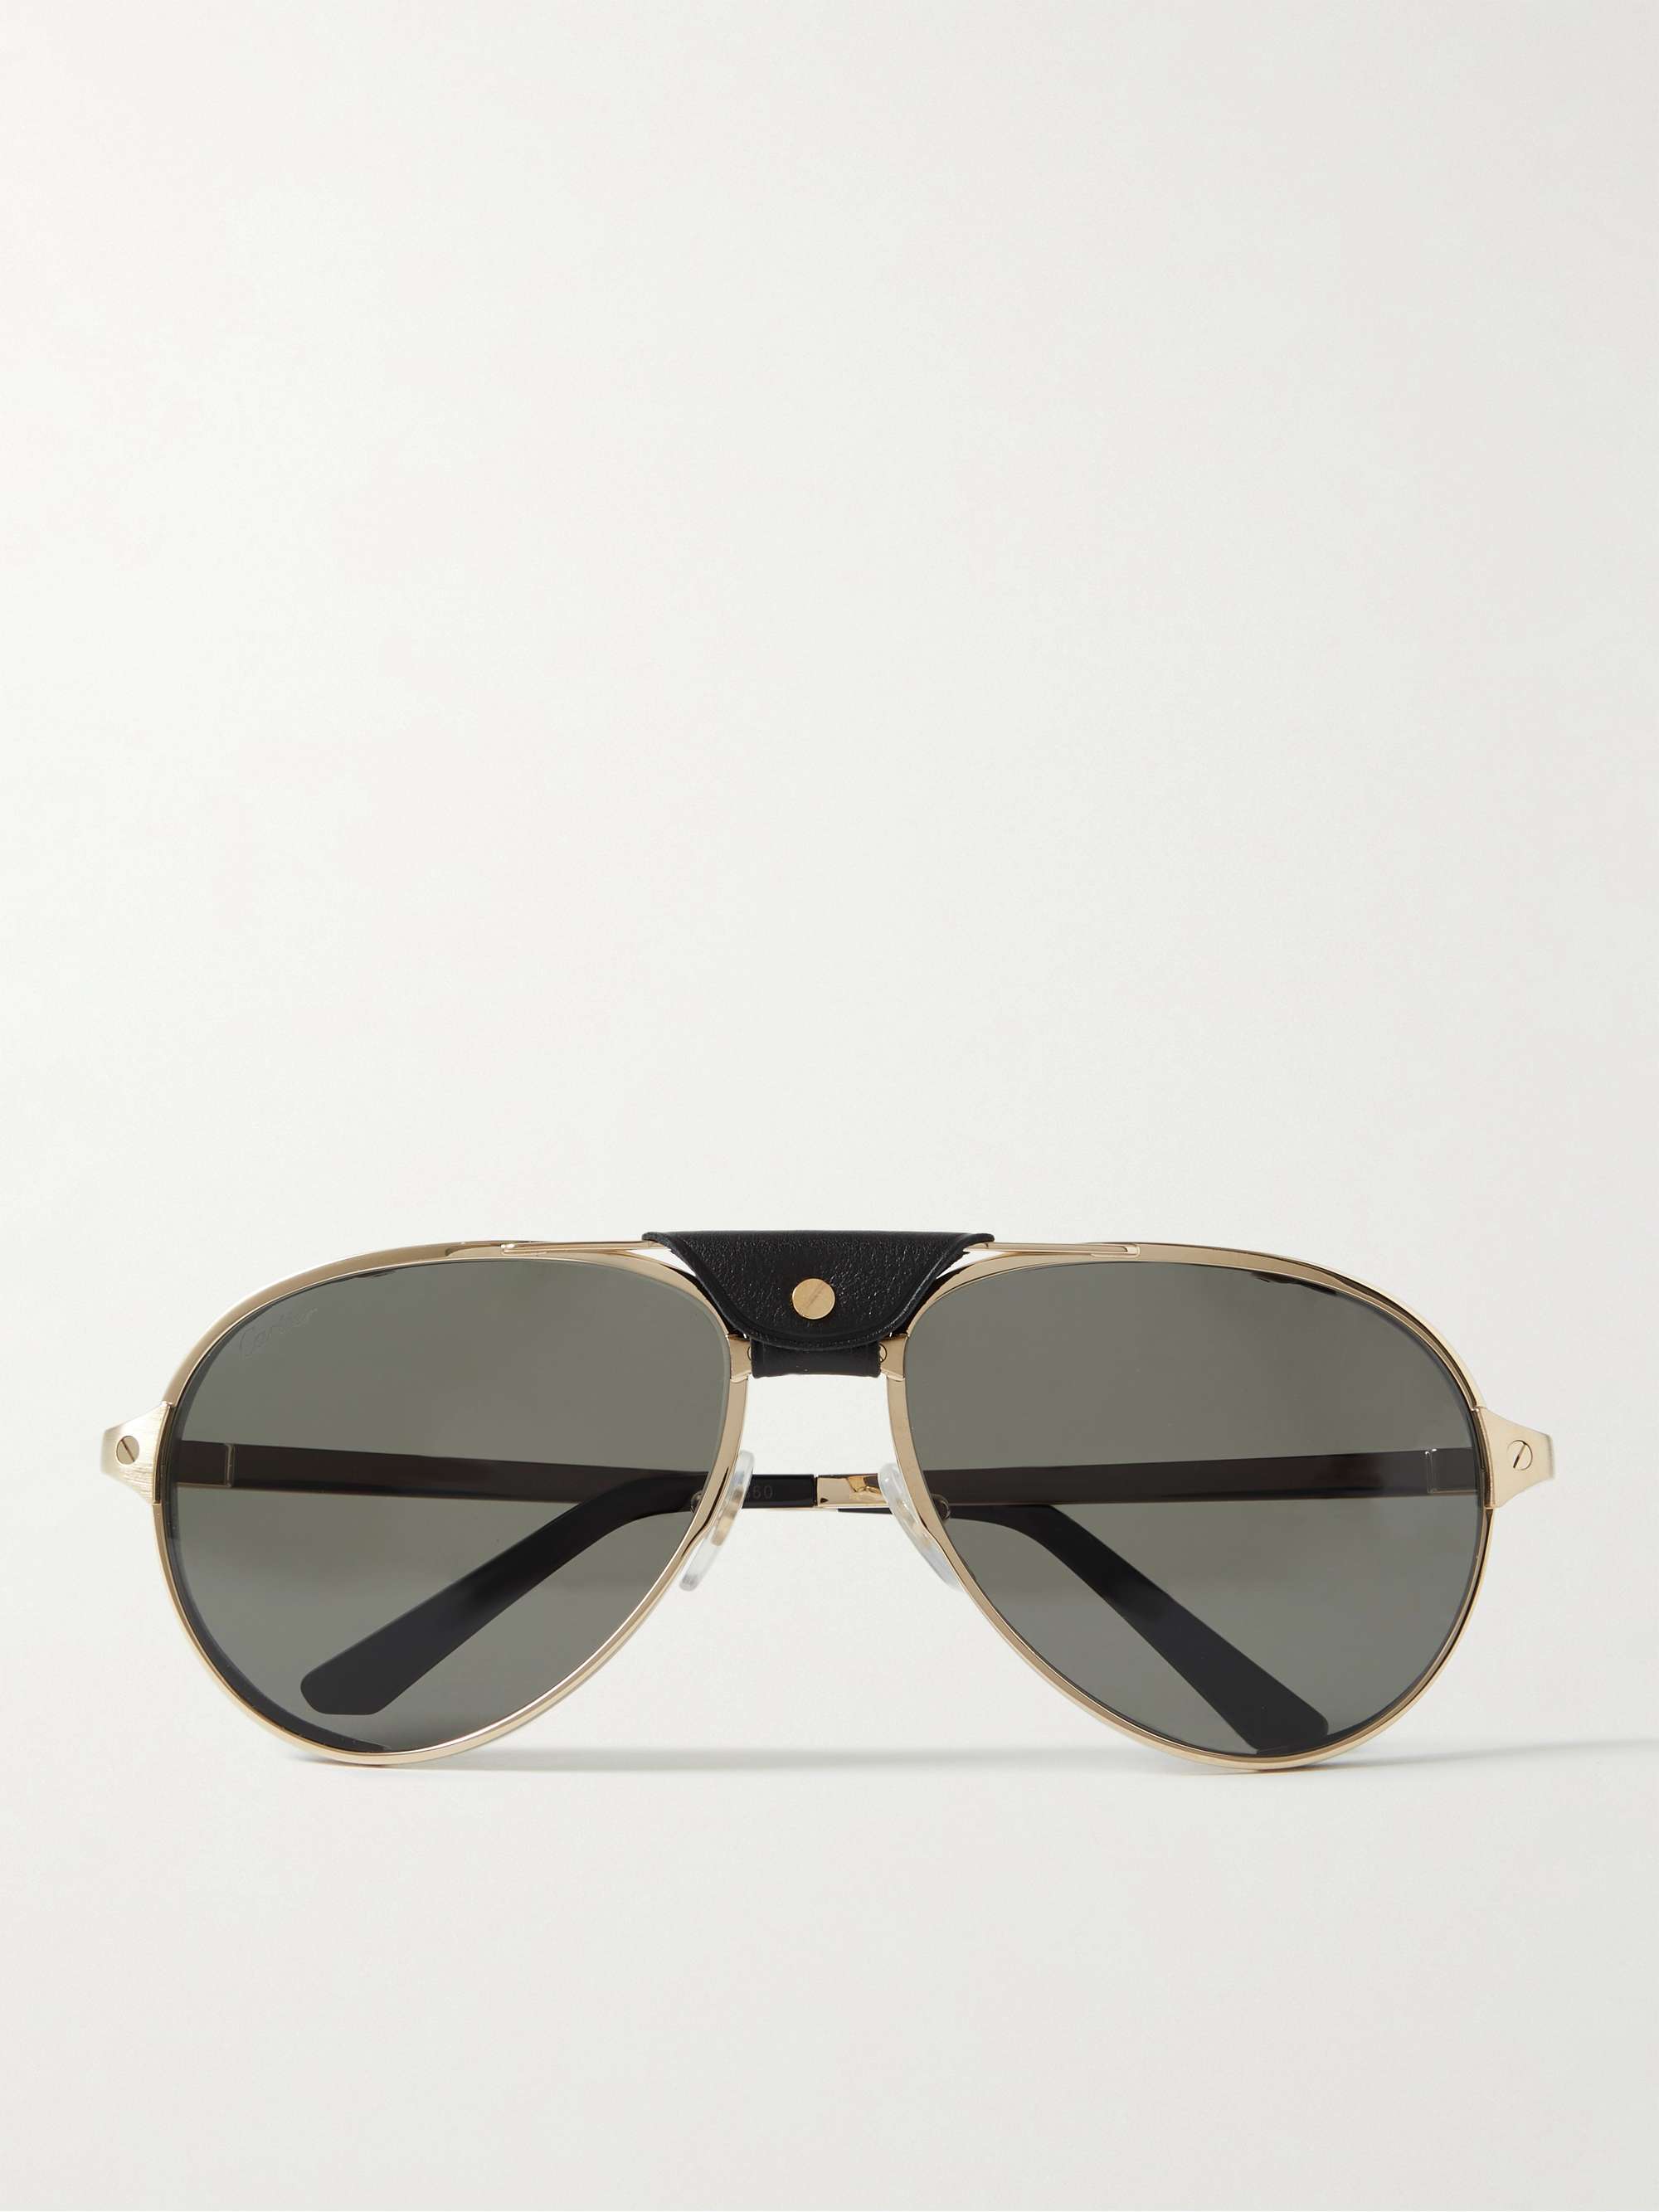 CARTIER EYEWEAR Aviator-Style Leather-Trimmed Gold-Tone Sunglasses